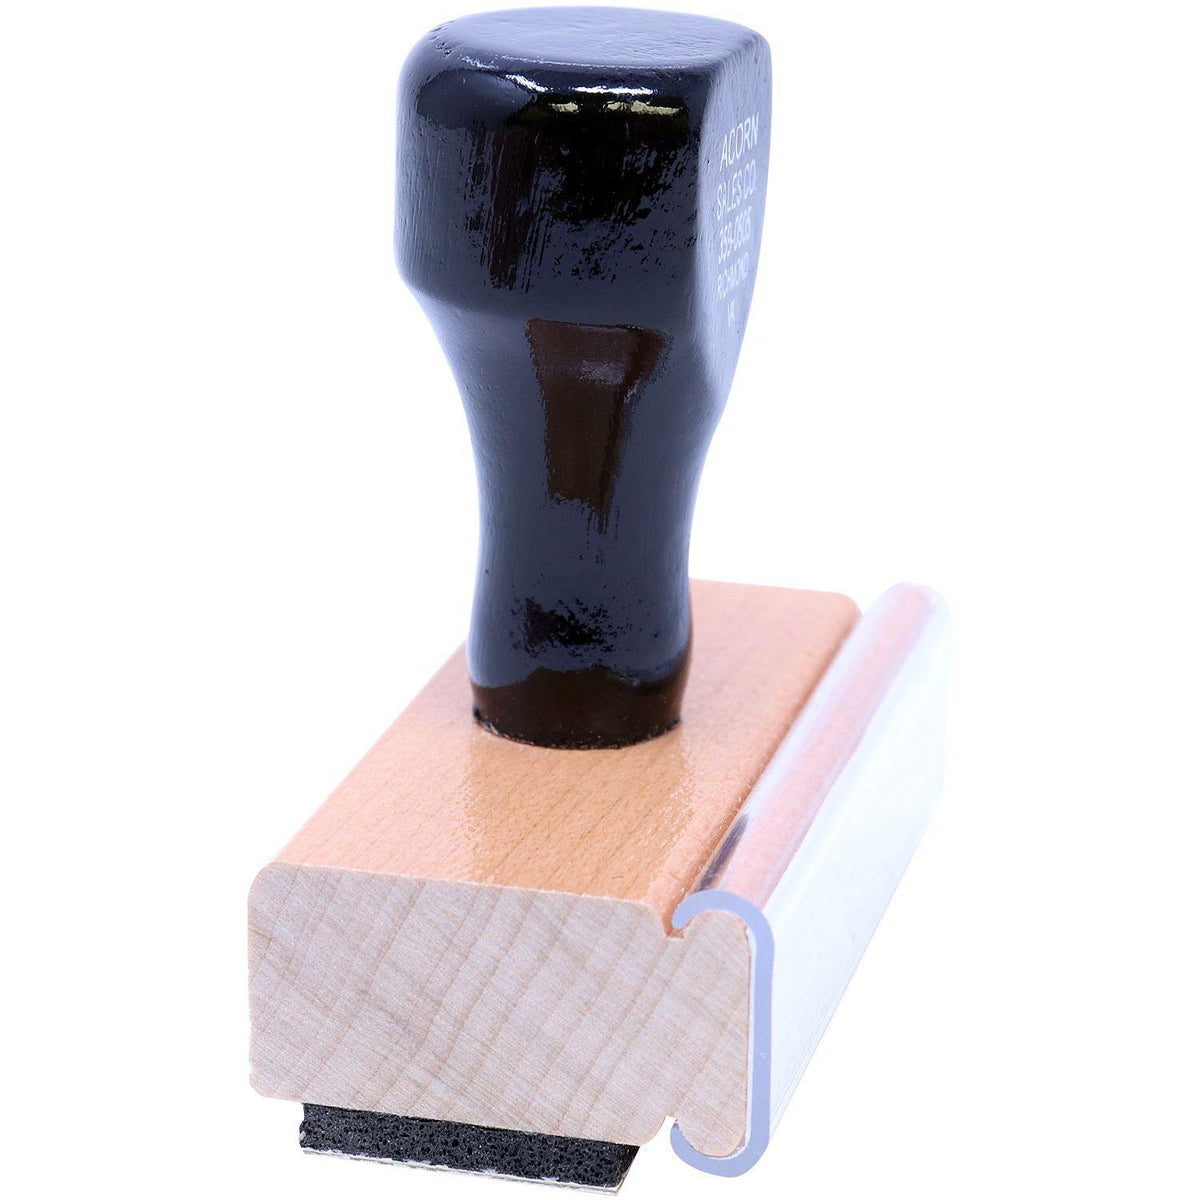 Side View of Large Economy Rate Rubber Stamp at an Angle